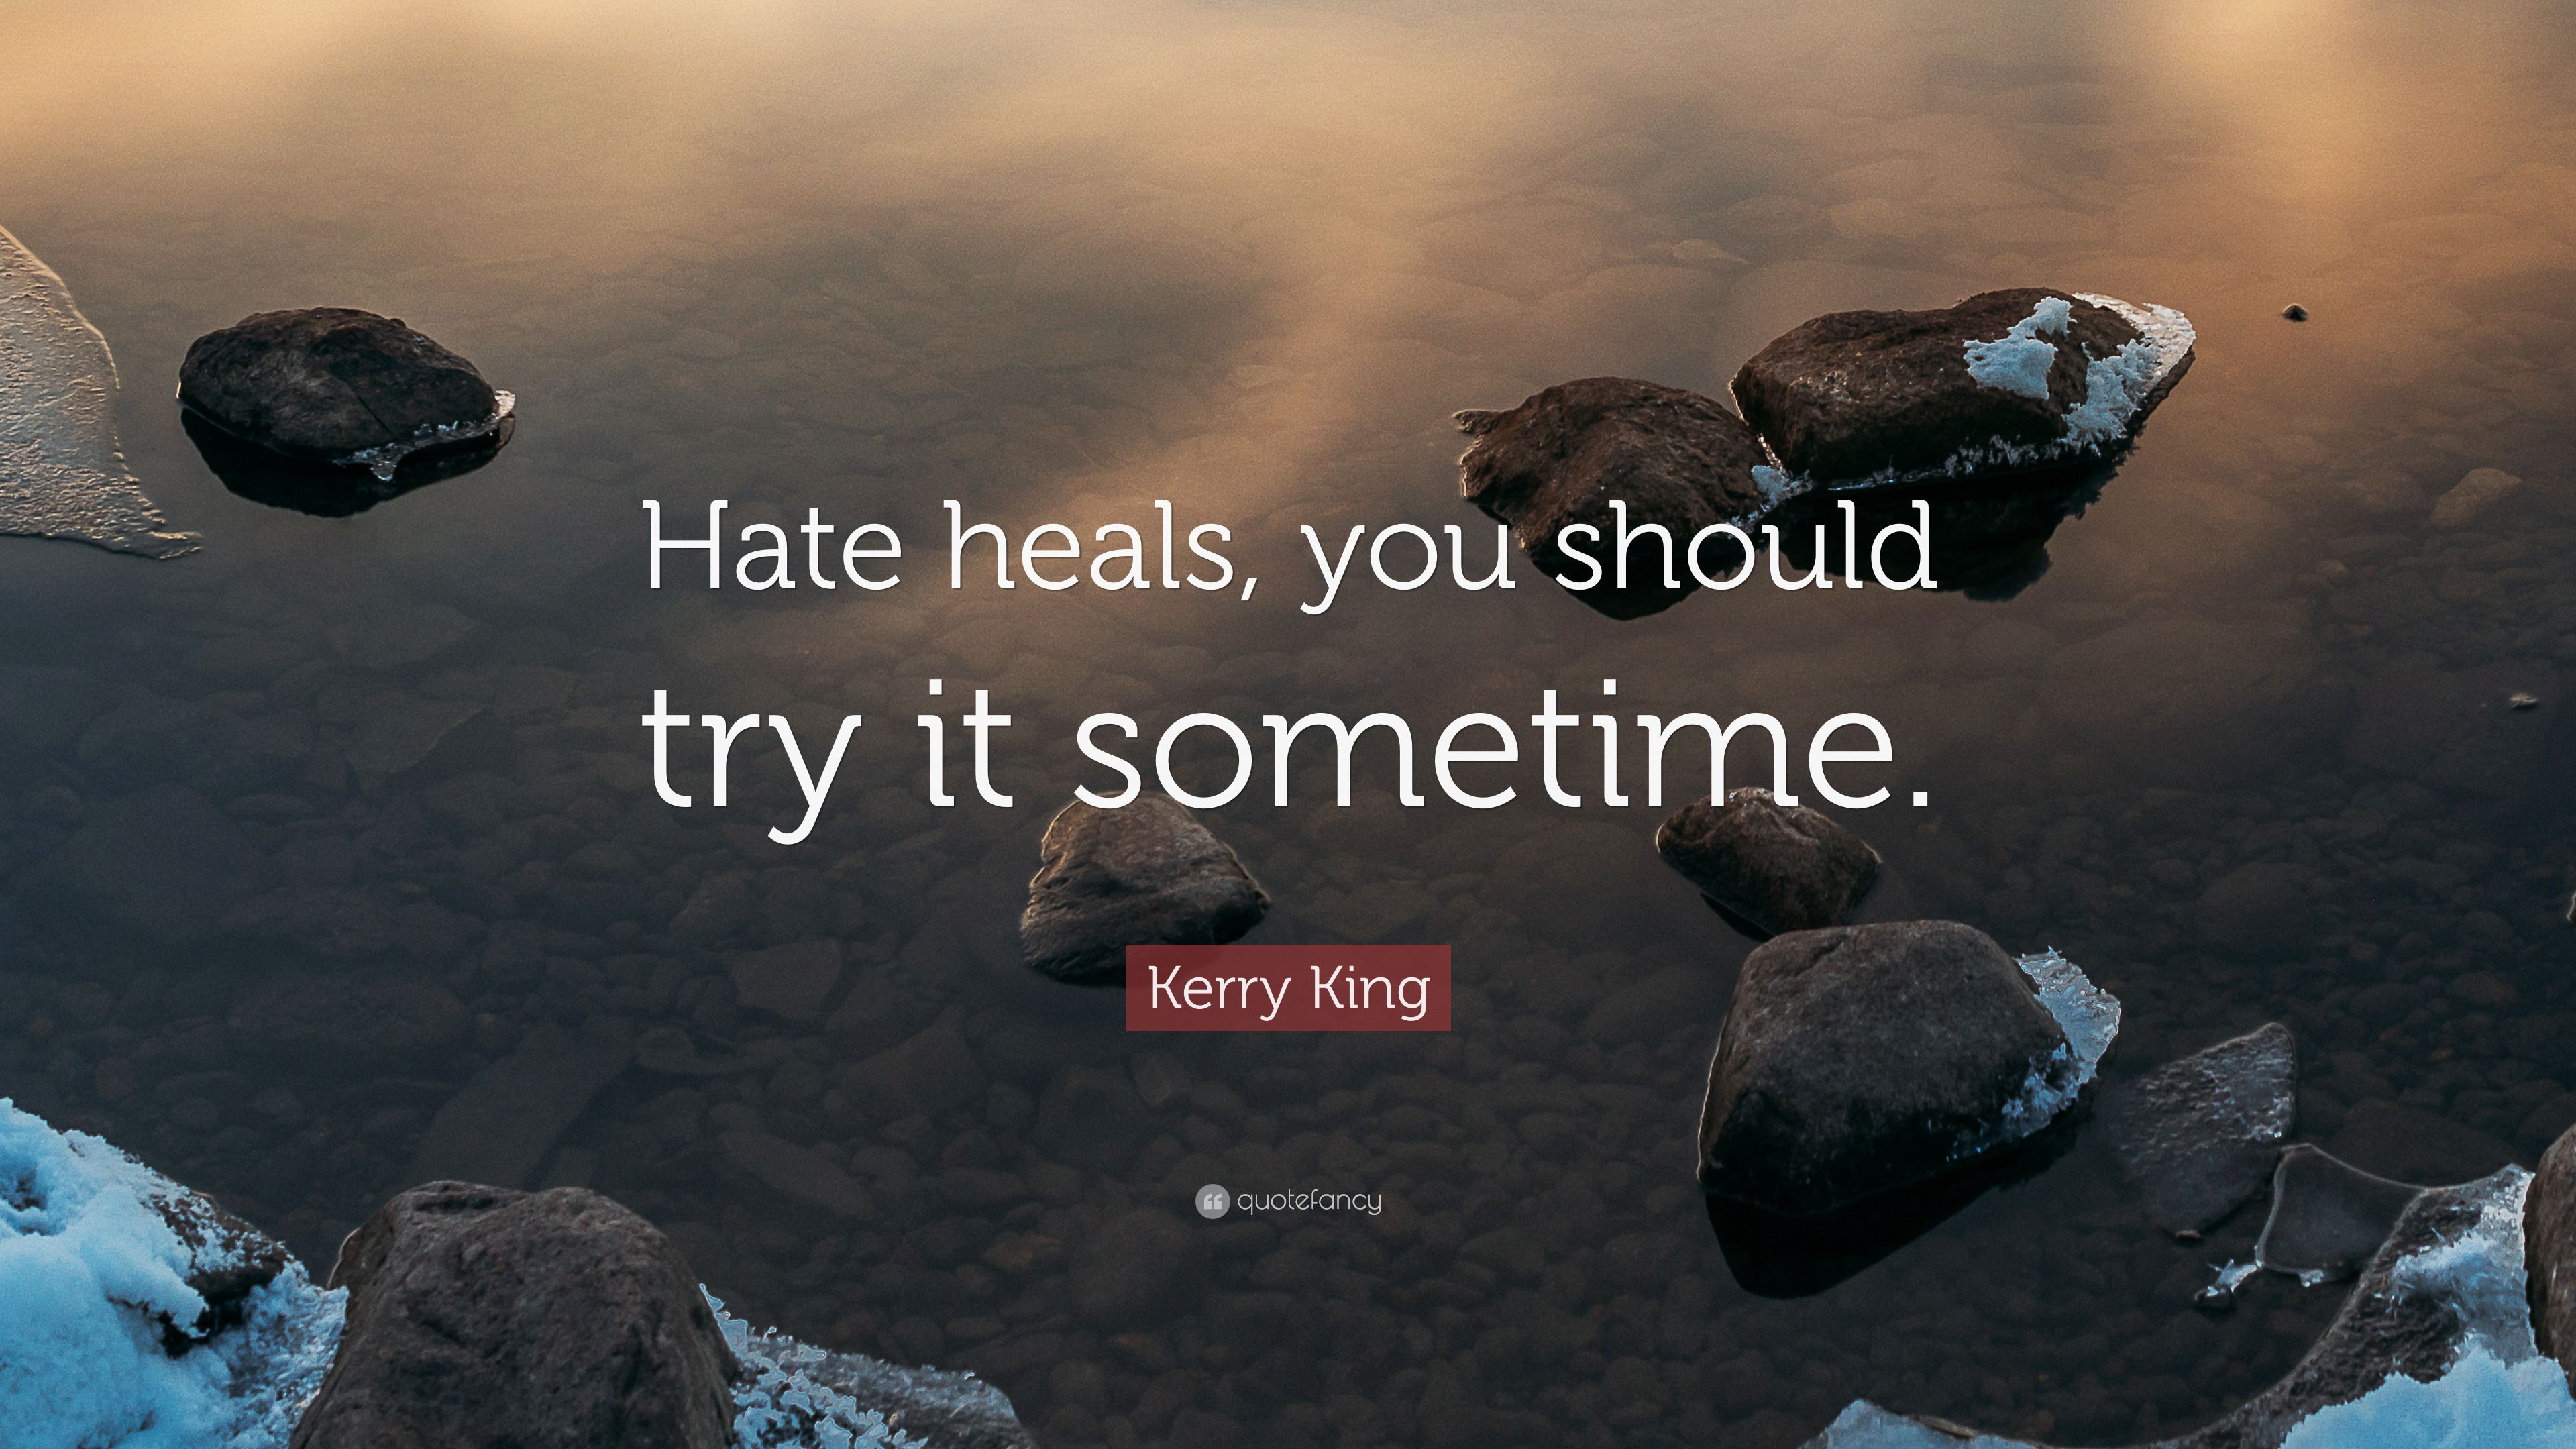 Kerry King Quote: “Hate heals, you should try it sometime.” (9 wallpaper)